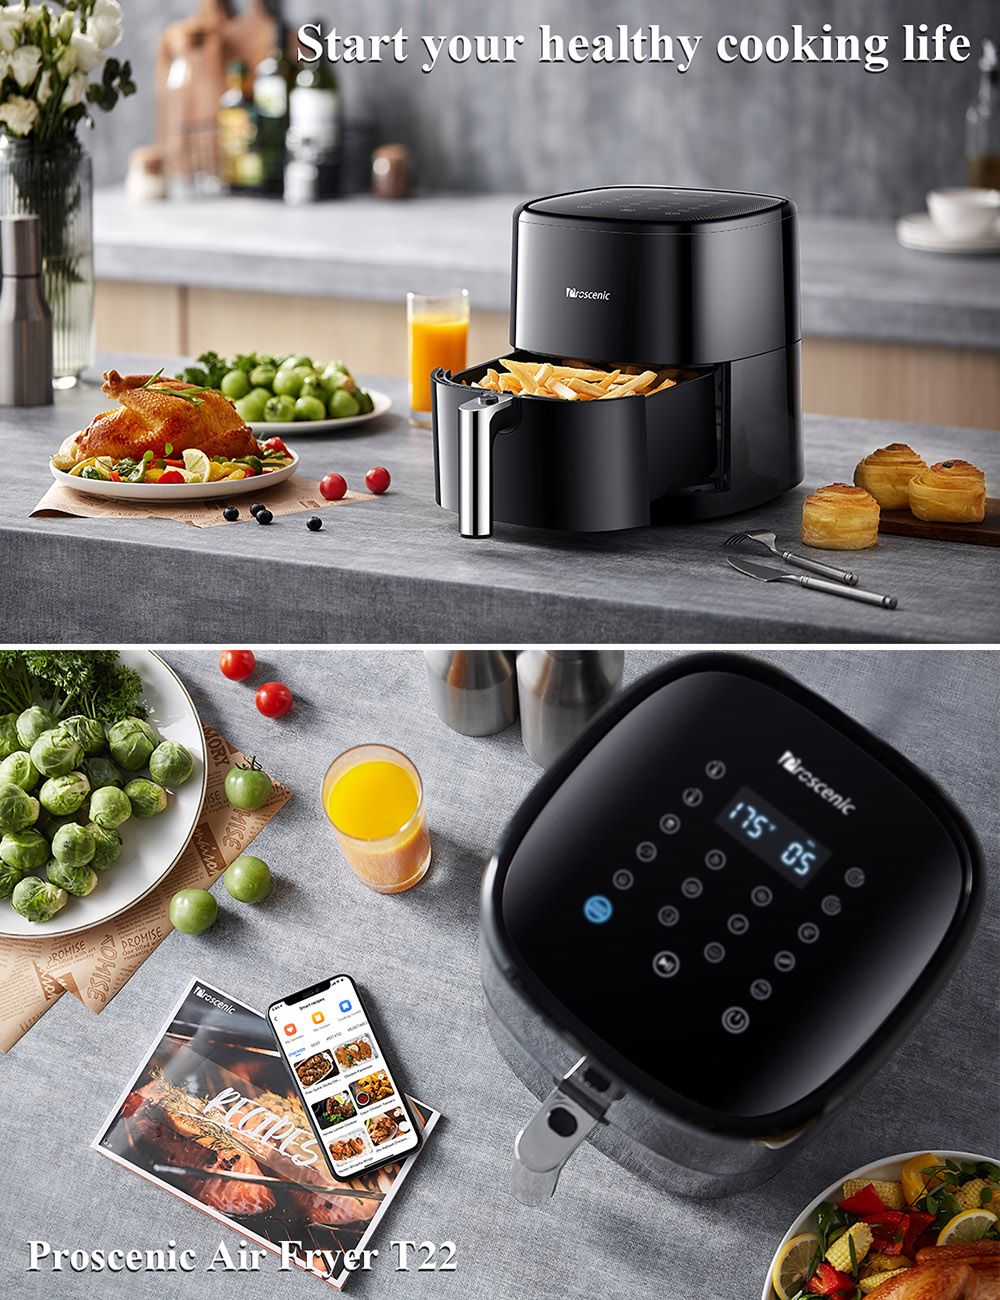 Proscenic T22 Smart Electric Air Fryer Oil-Free Non-stick Pan 5L 3D HF Circulation Technology Customized Recipes LED Touch Screen App Control - Black